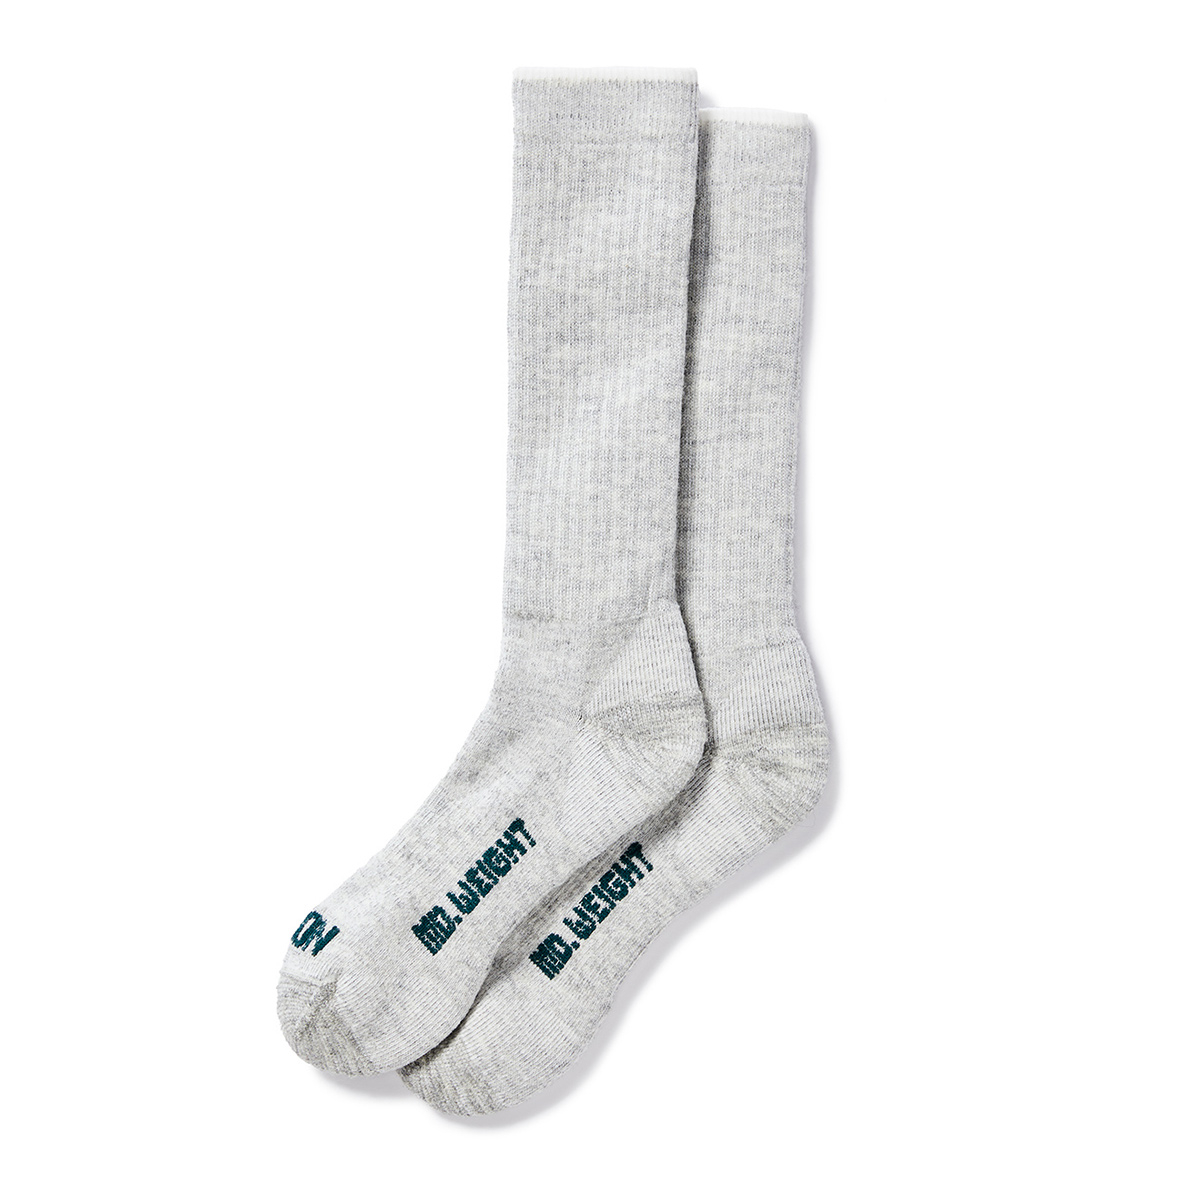 Filson Midweight Traditional Crew Socks use merino wool with a touch of nylon and spandex